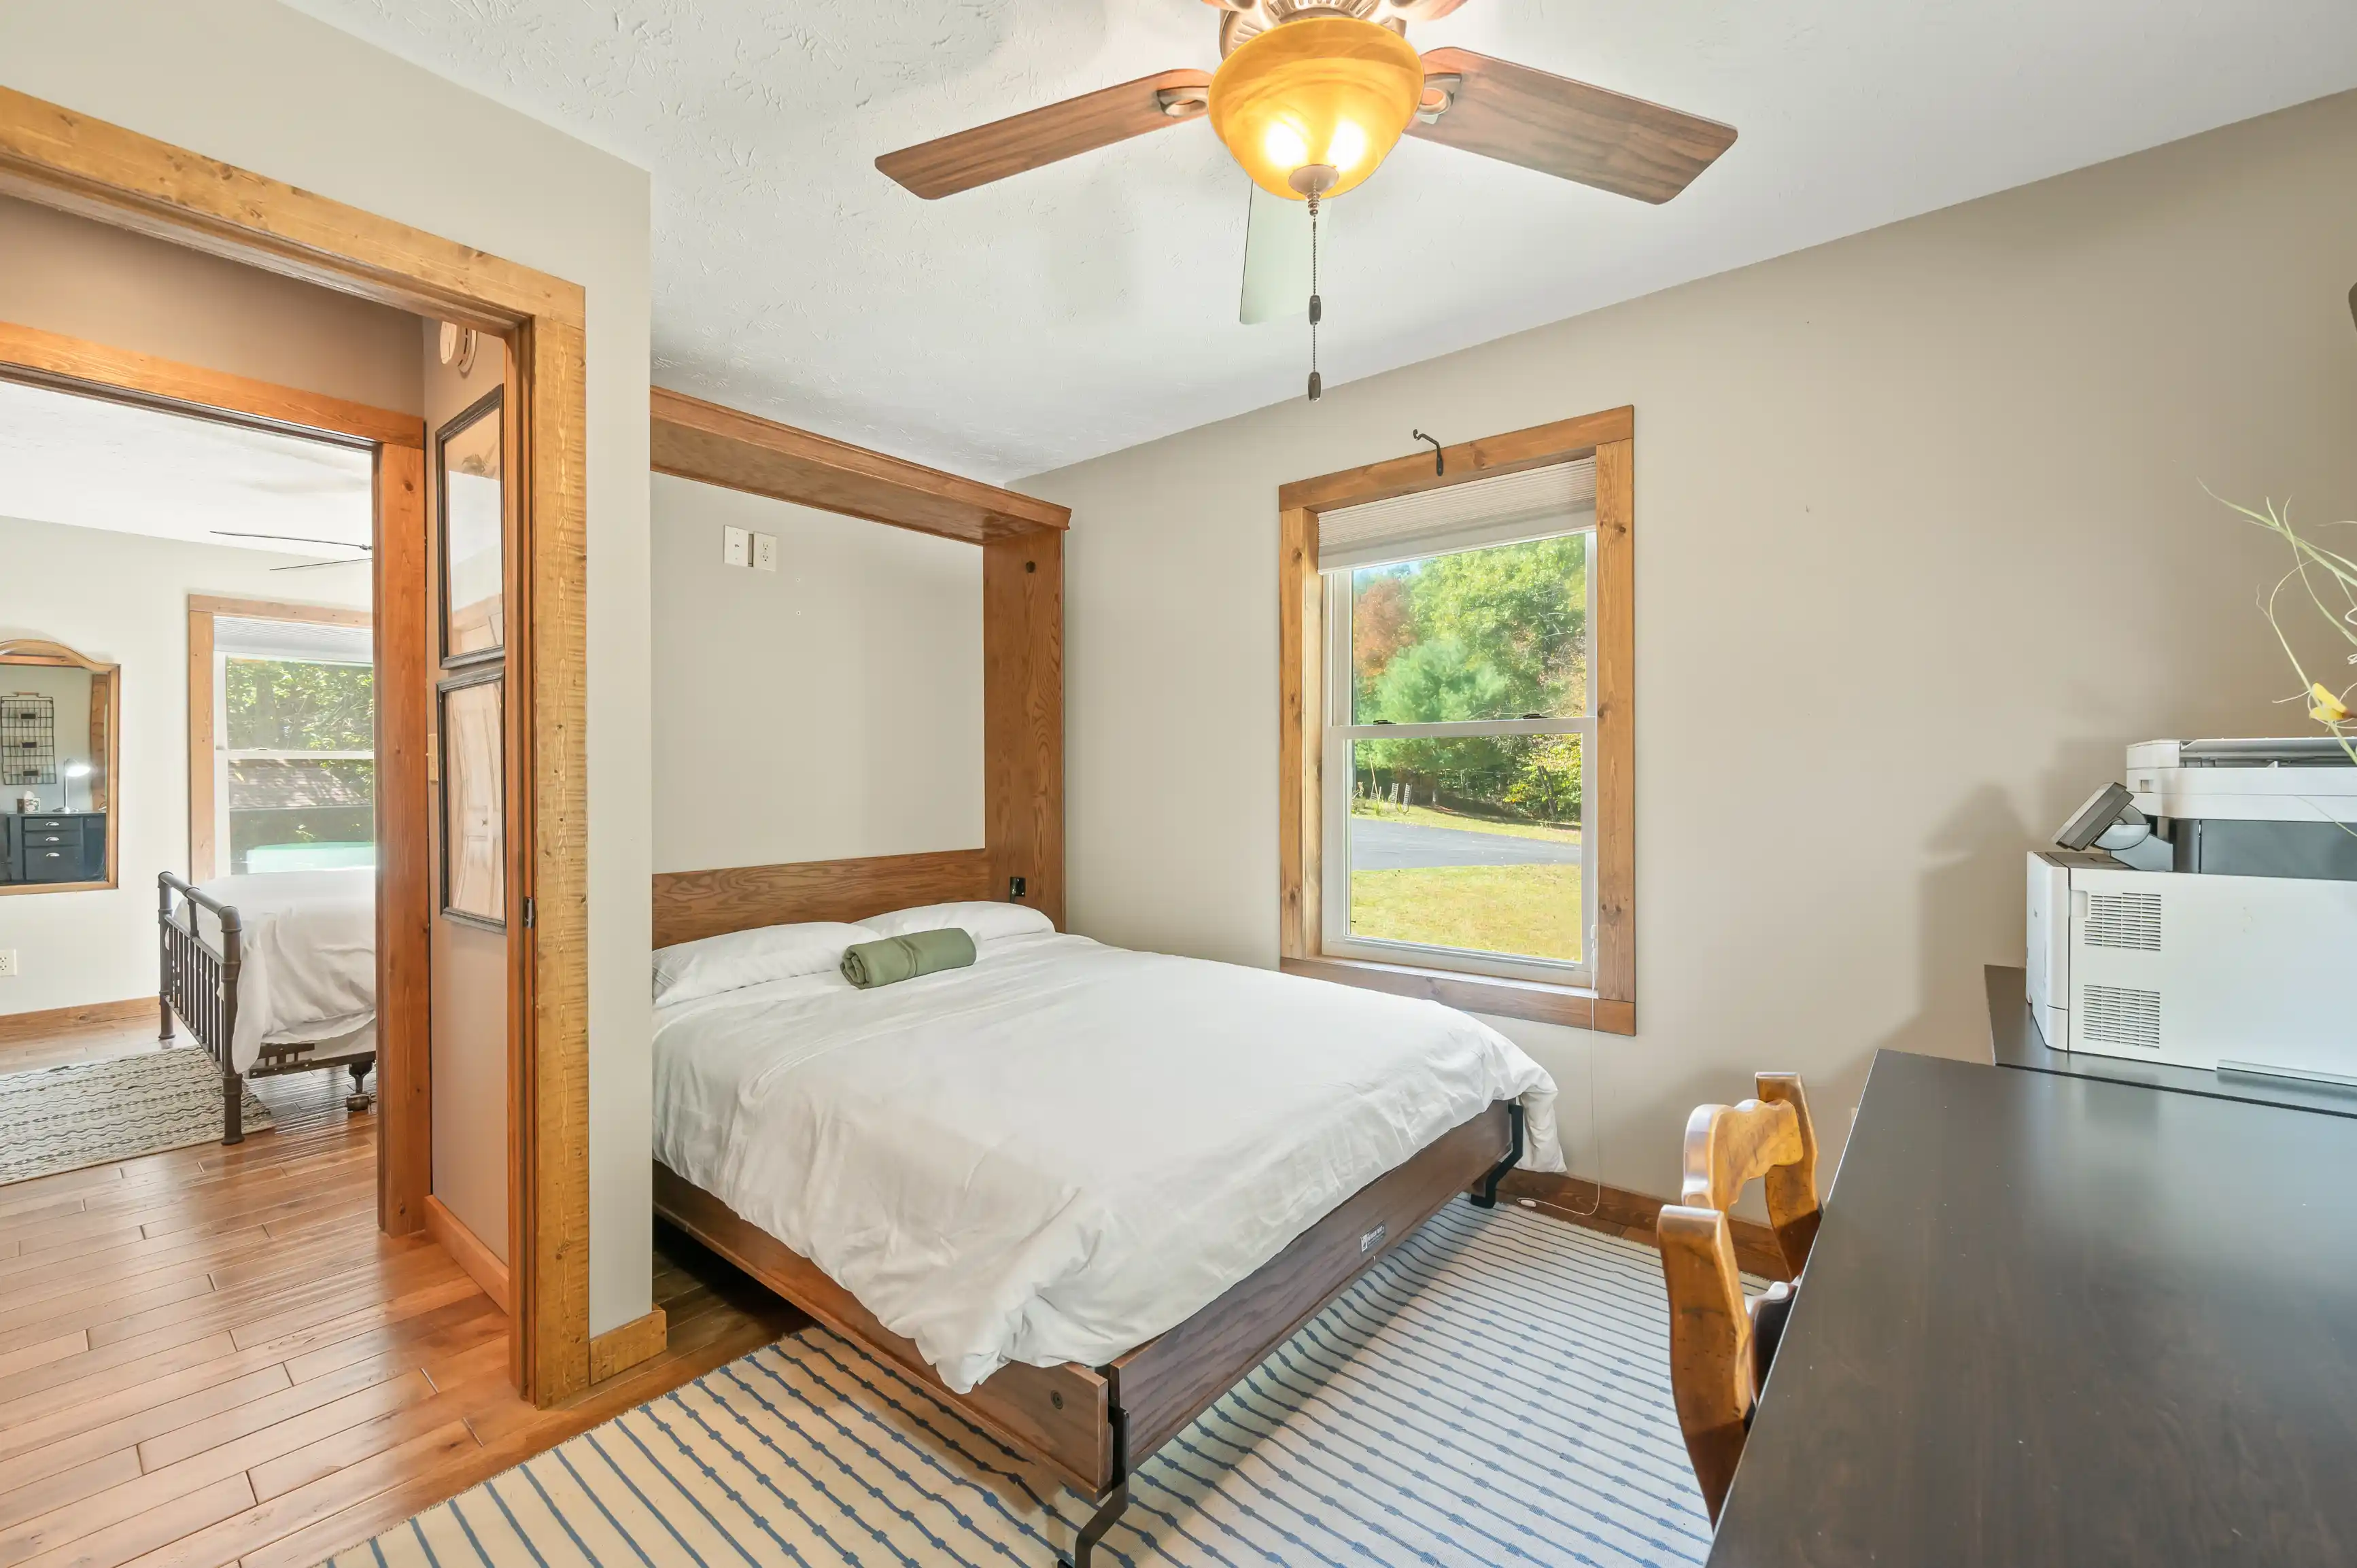 Bright and airy bedroom with a double bed, wooden ceiling fan, floor-to-ceiling wood trim, striped area rug, and a view of the yard through two large windows.